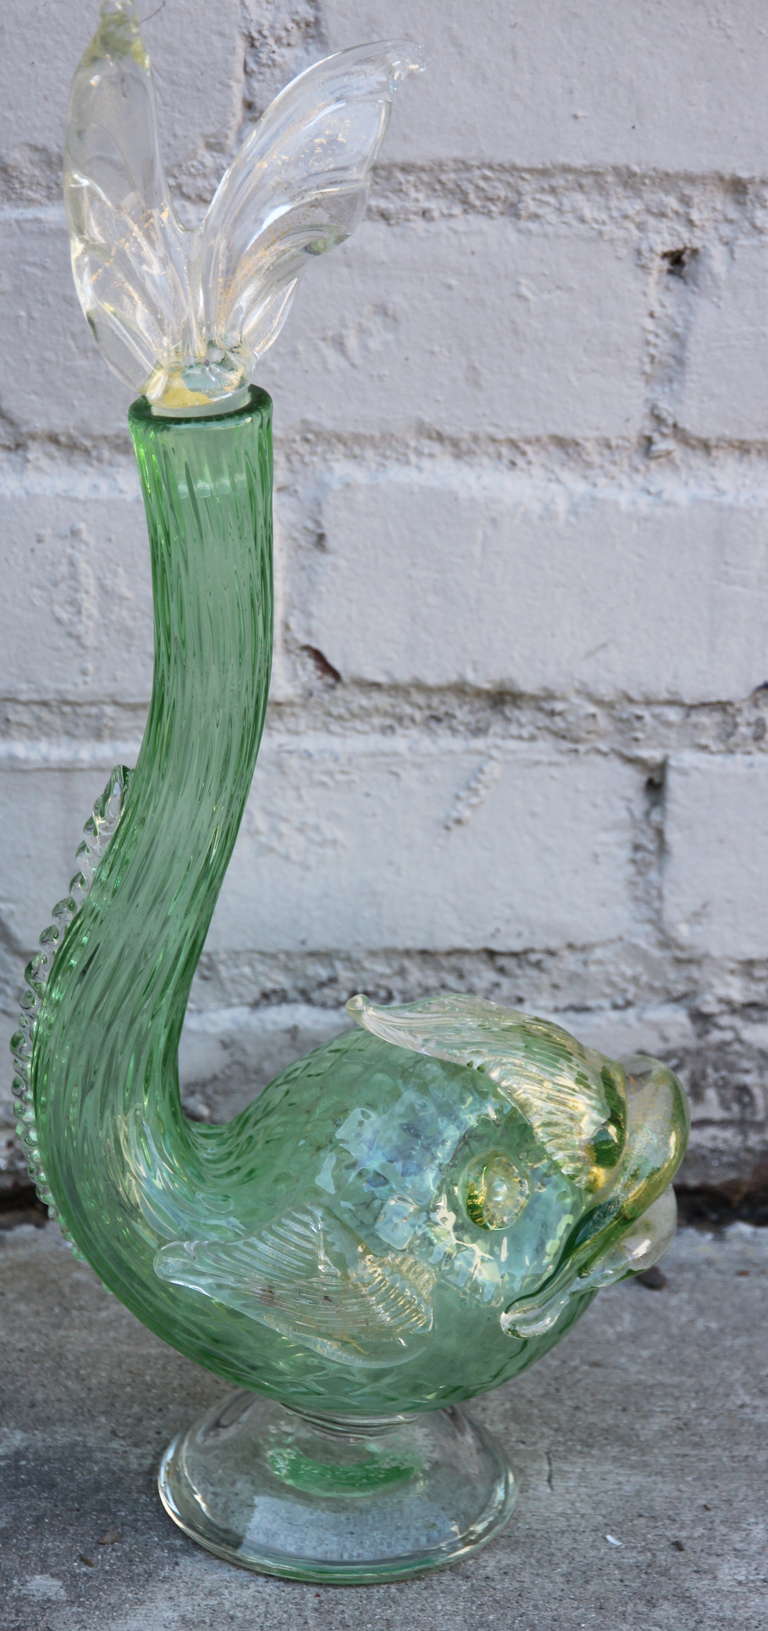 Other Unique Murano Dolphin Shaped Decanter